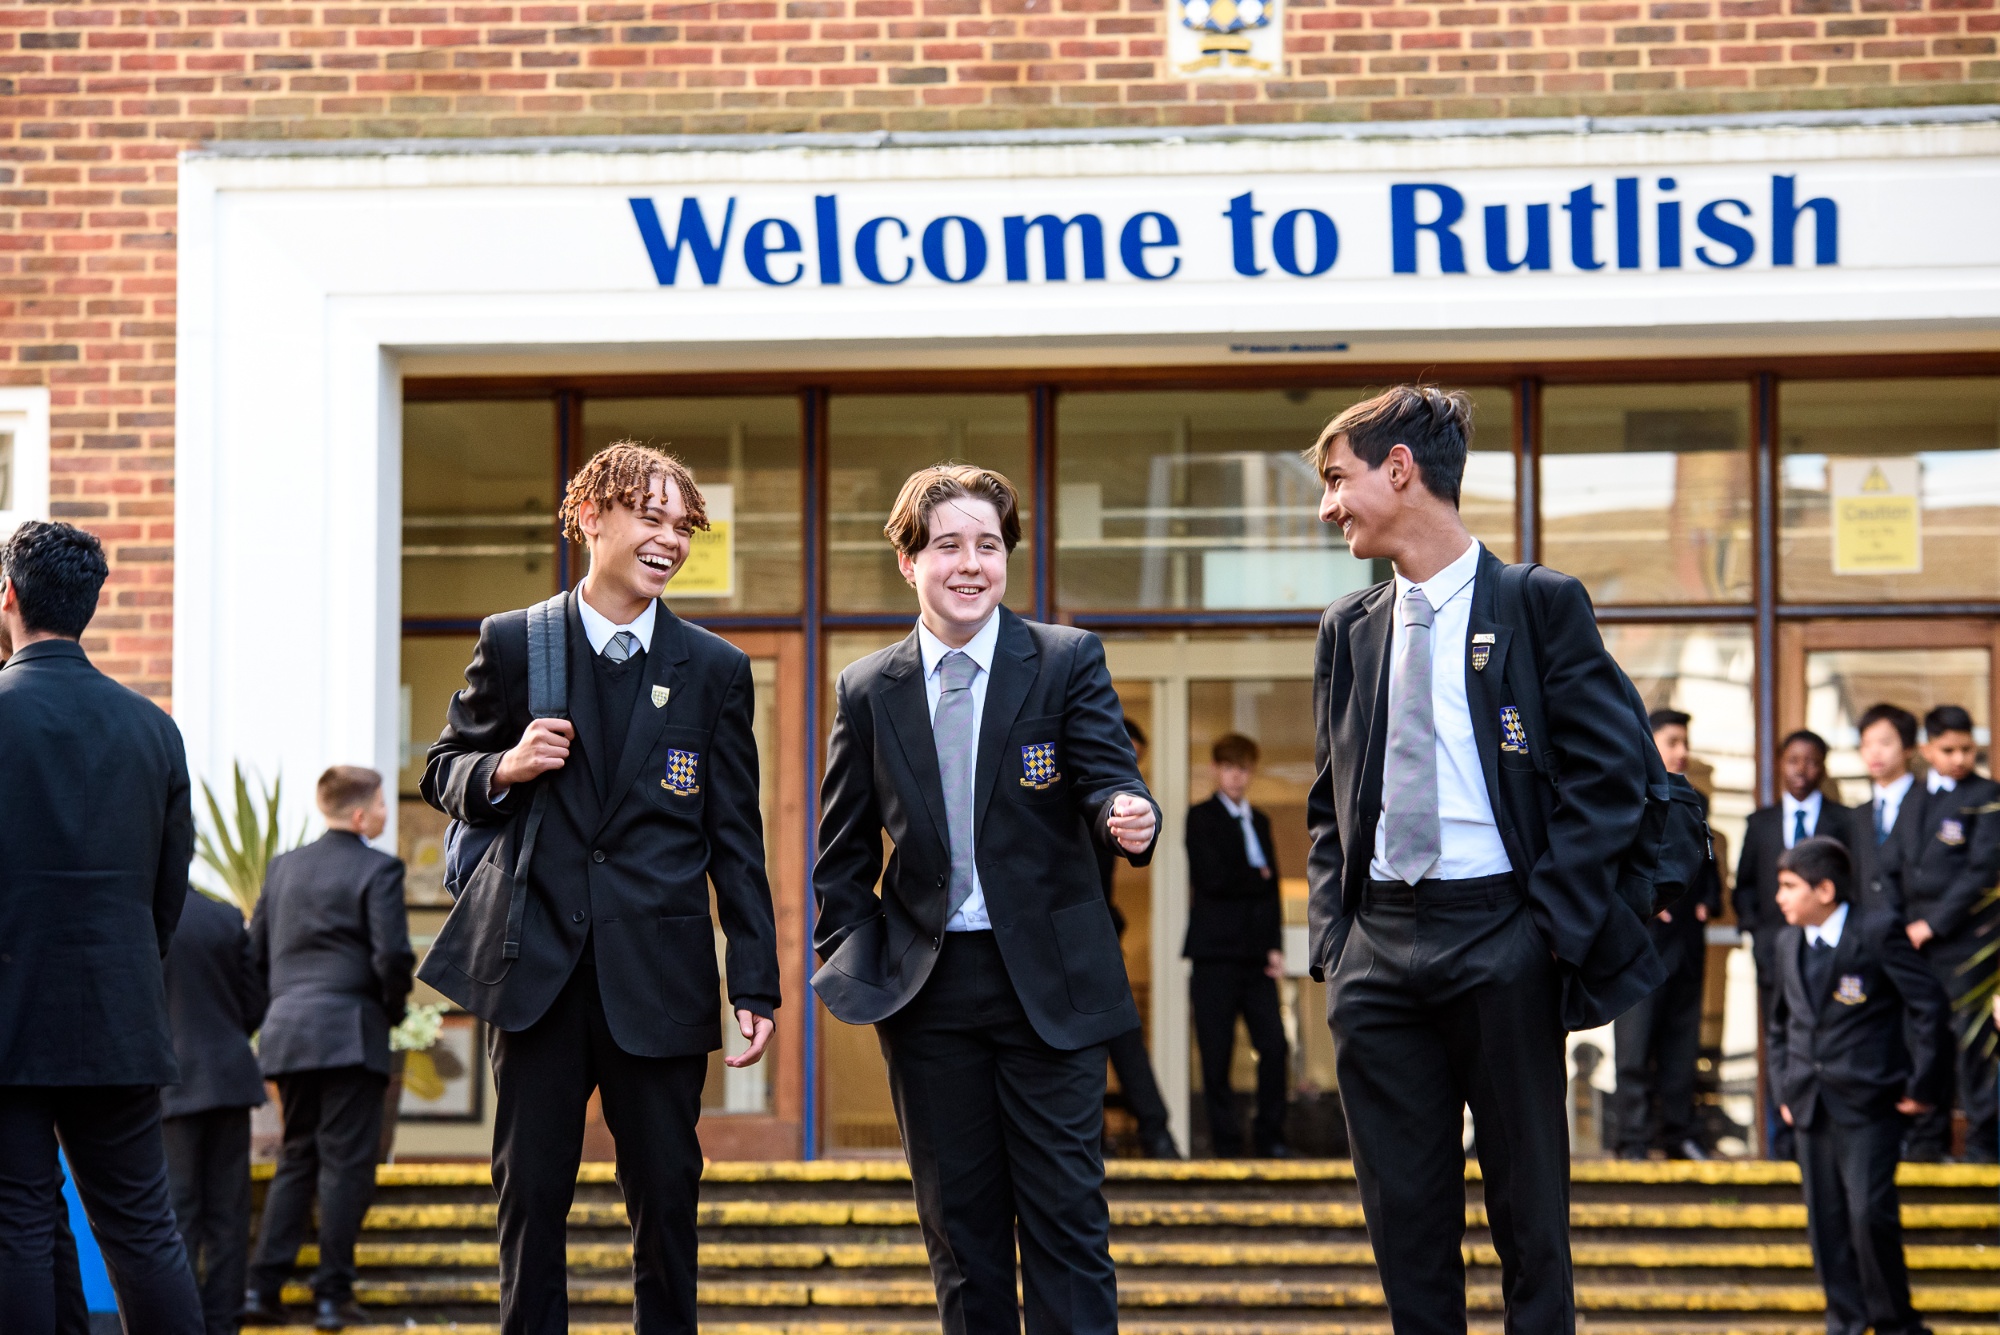 students near the "Welcome to Rutlish" sign